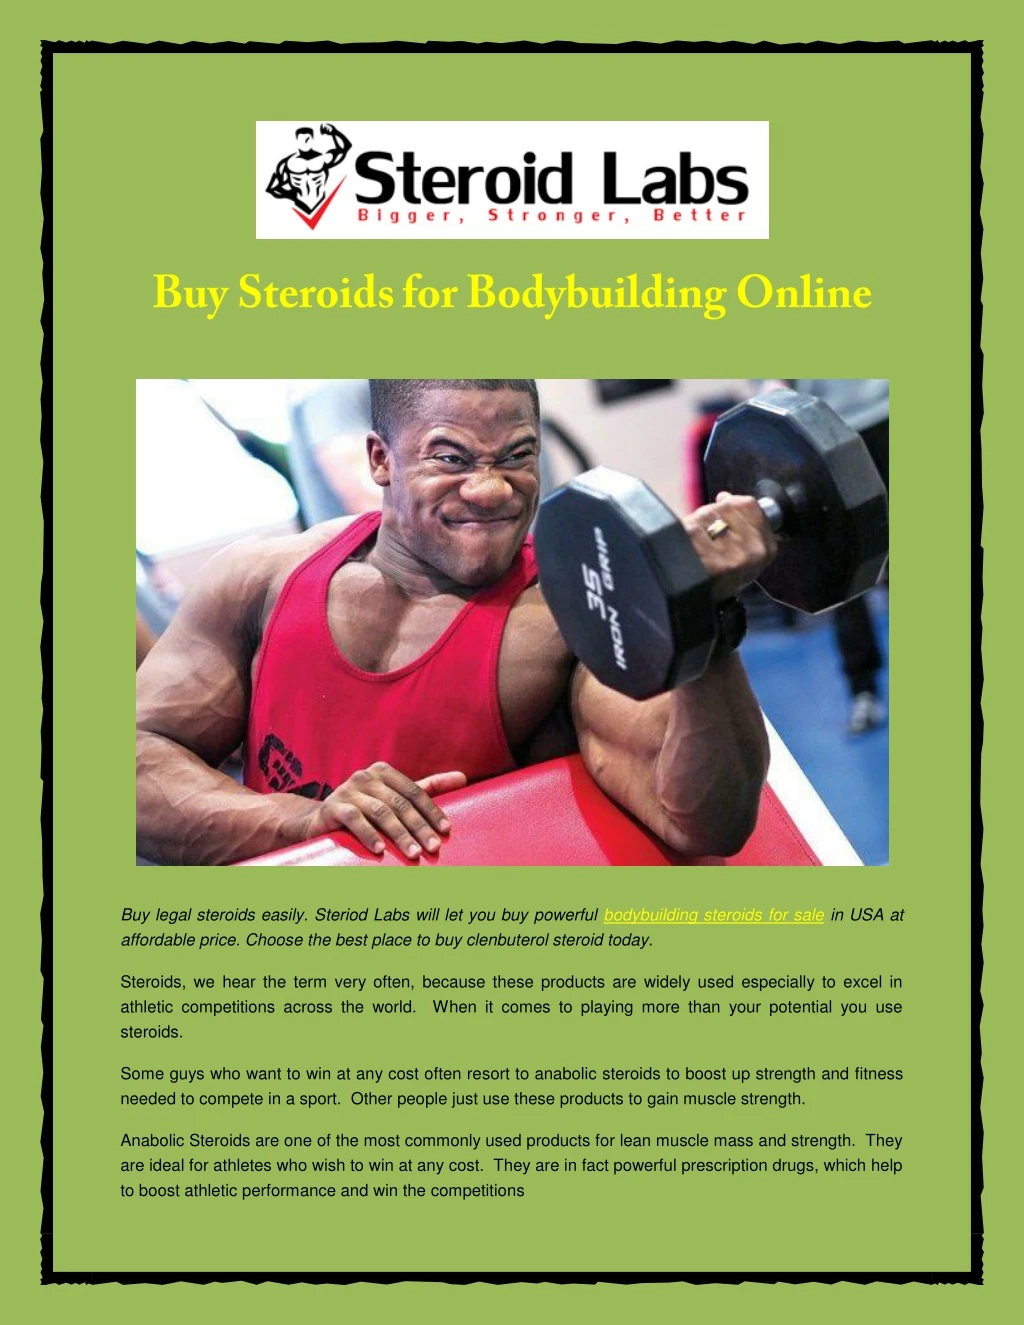 buy legal steroids easily steriod labs will